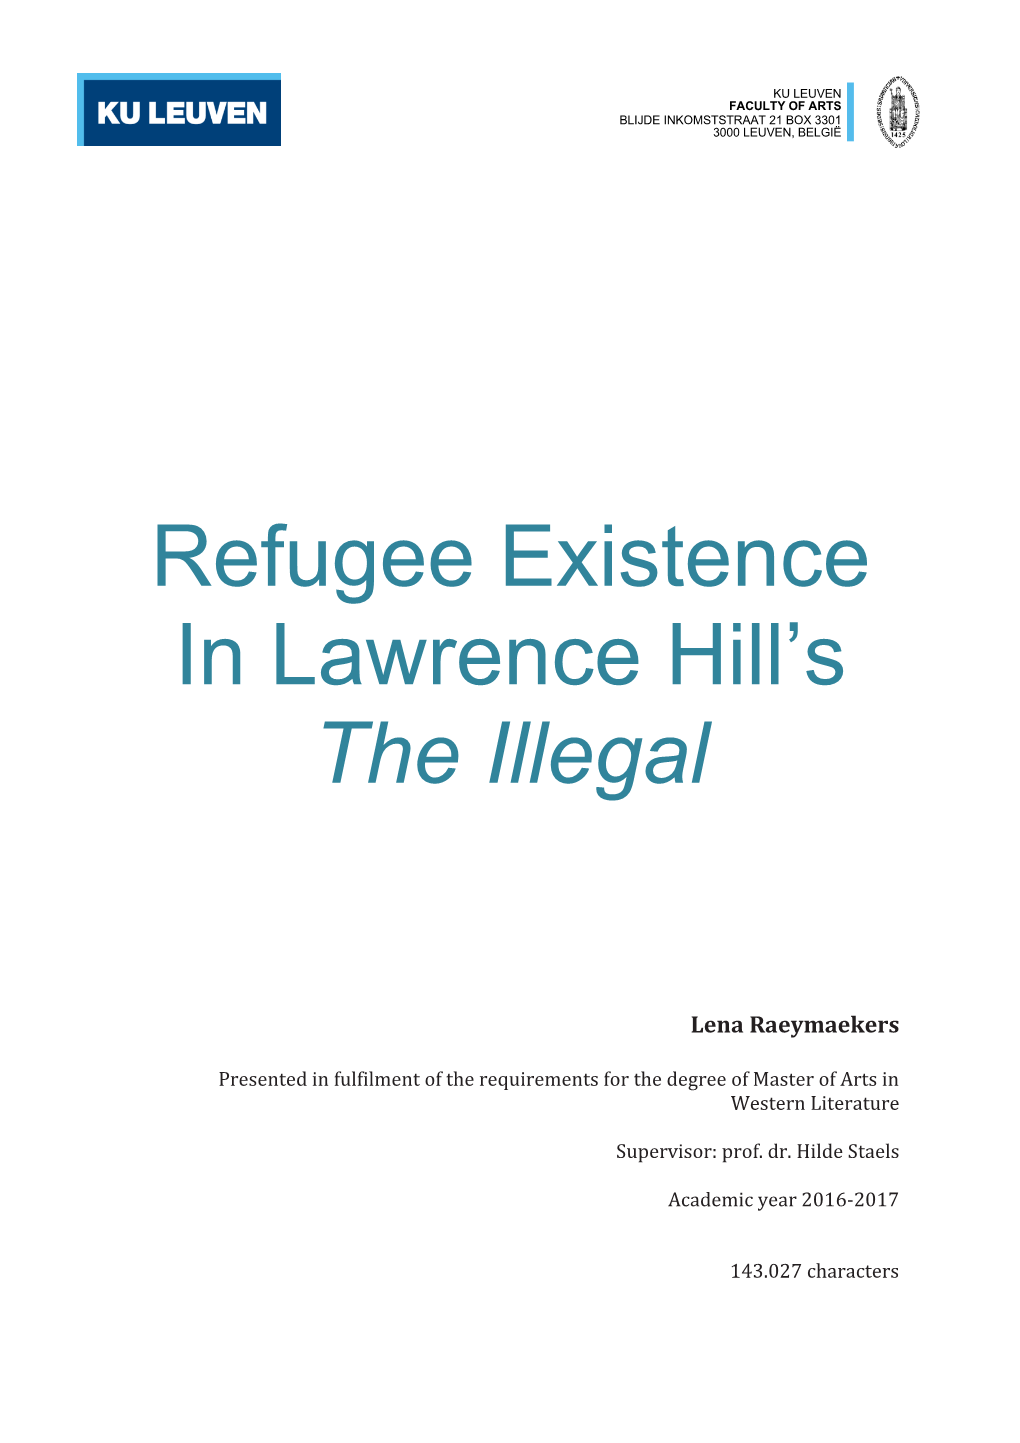 Refugee Existence in Lawrence Hill's the Illegal